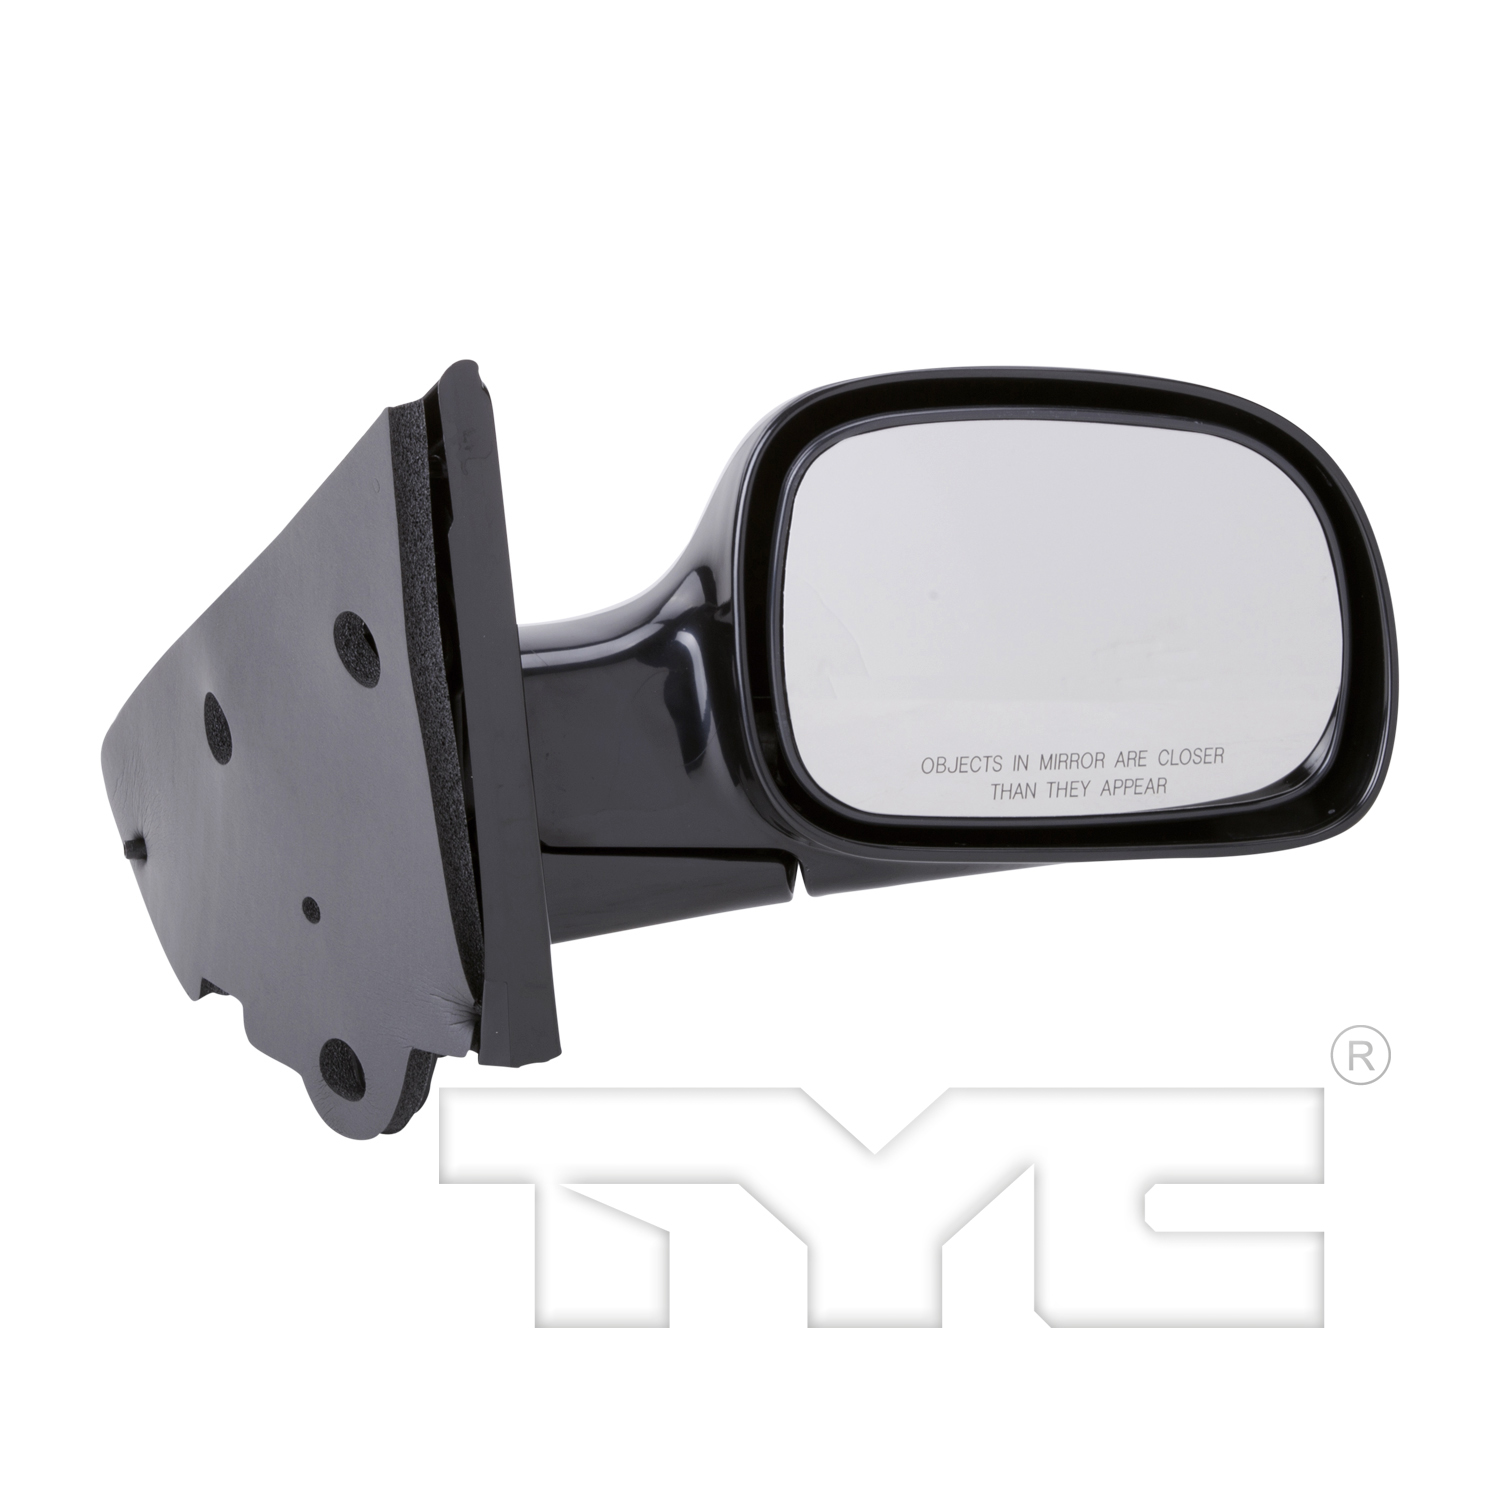 Aftermarket MIRRORS for CHRYSLER - VOYAGER, VOYAGER,01-03,RT Mirror outside rear view